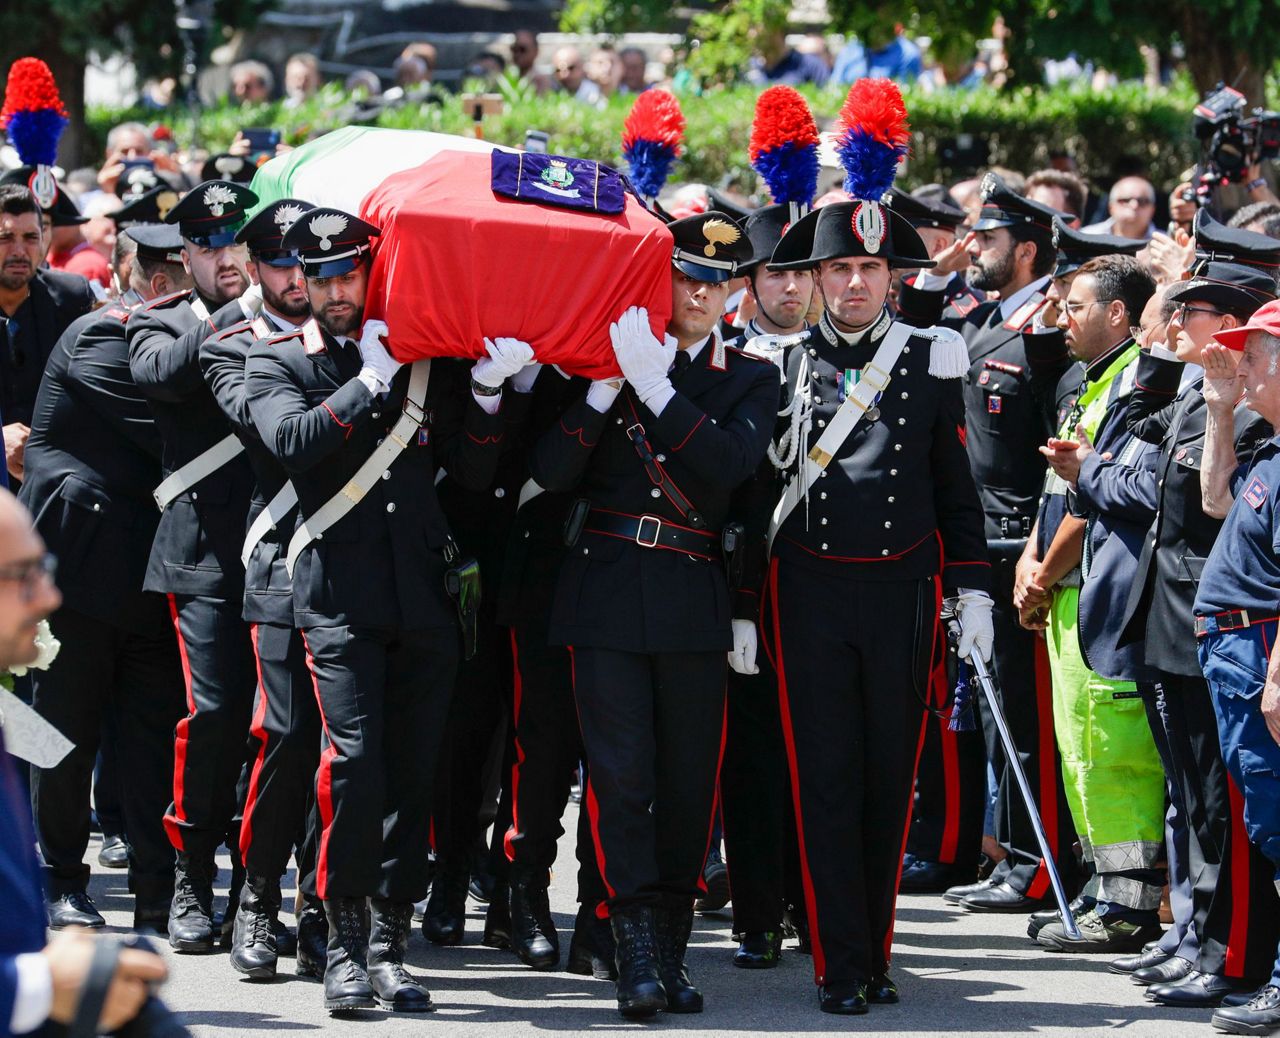 Italy police officer, allegedly slain by Americans, mourned 